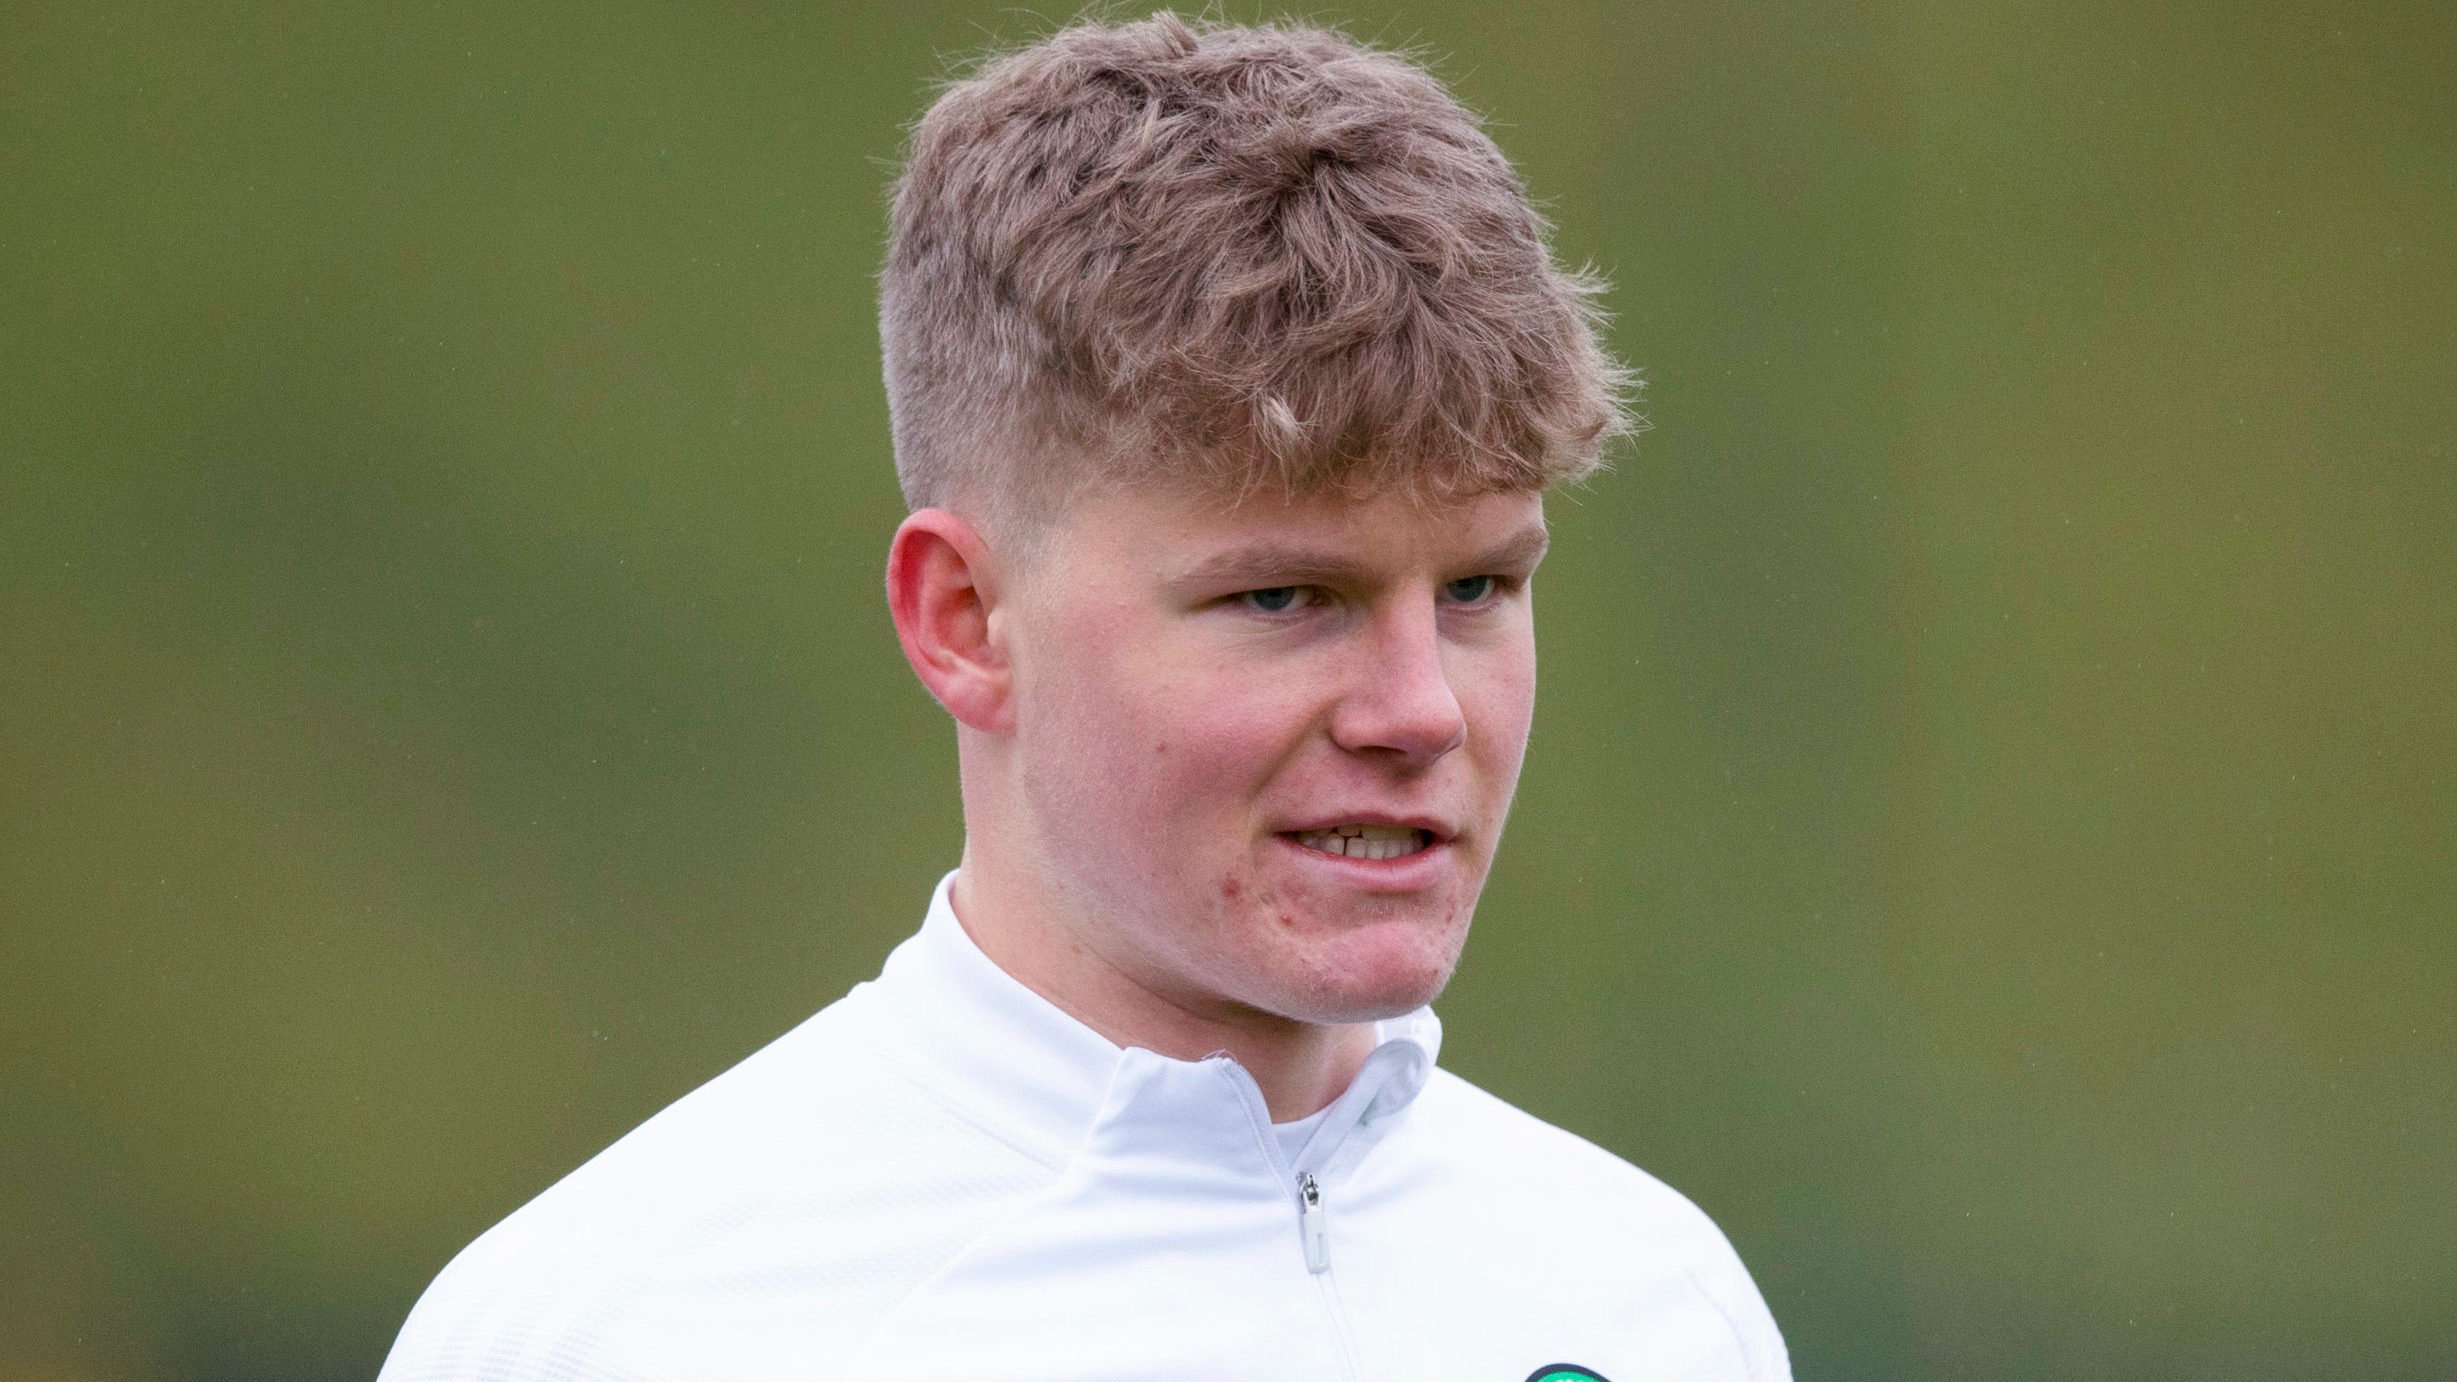 Celtic youngster Scott Robertson ready to start thriving at Parkhead